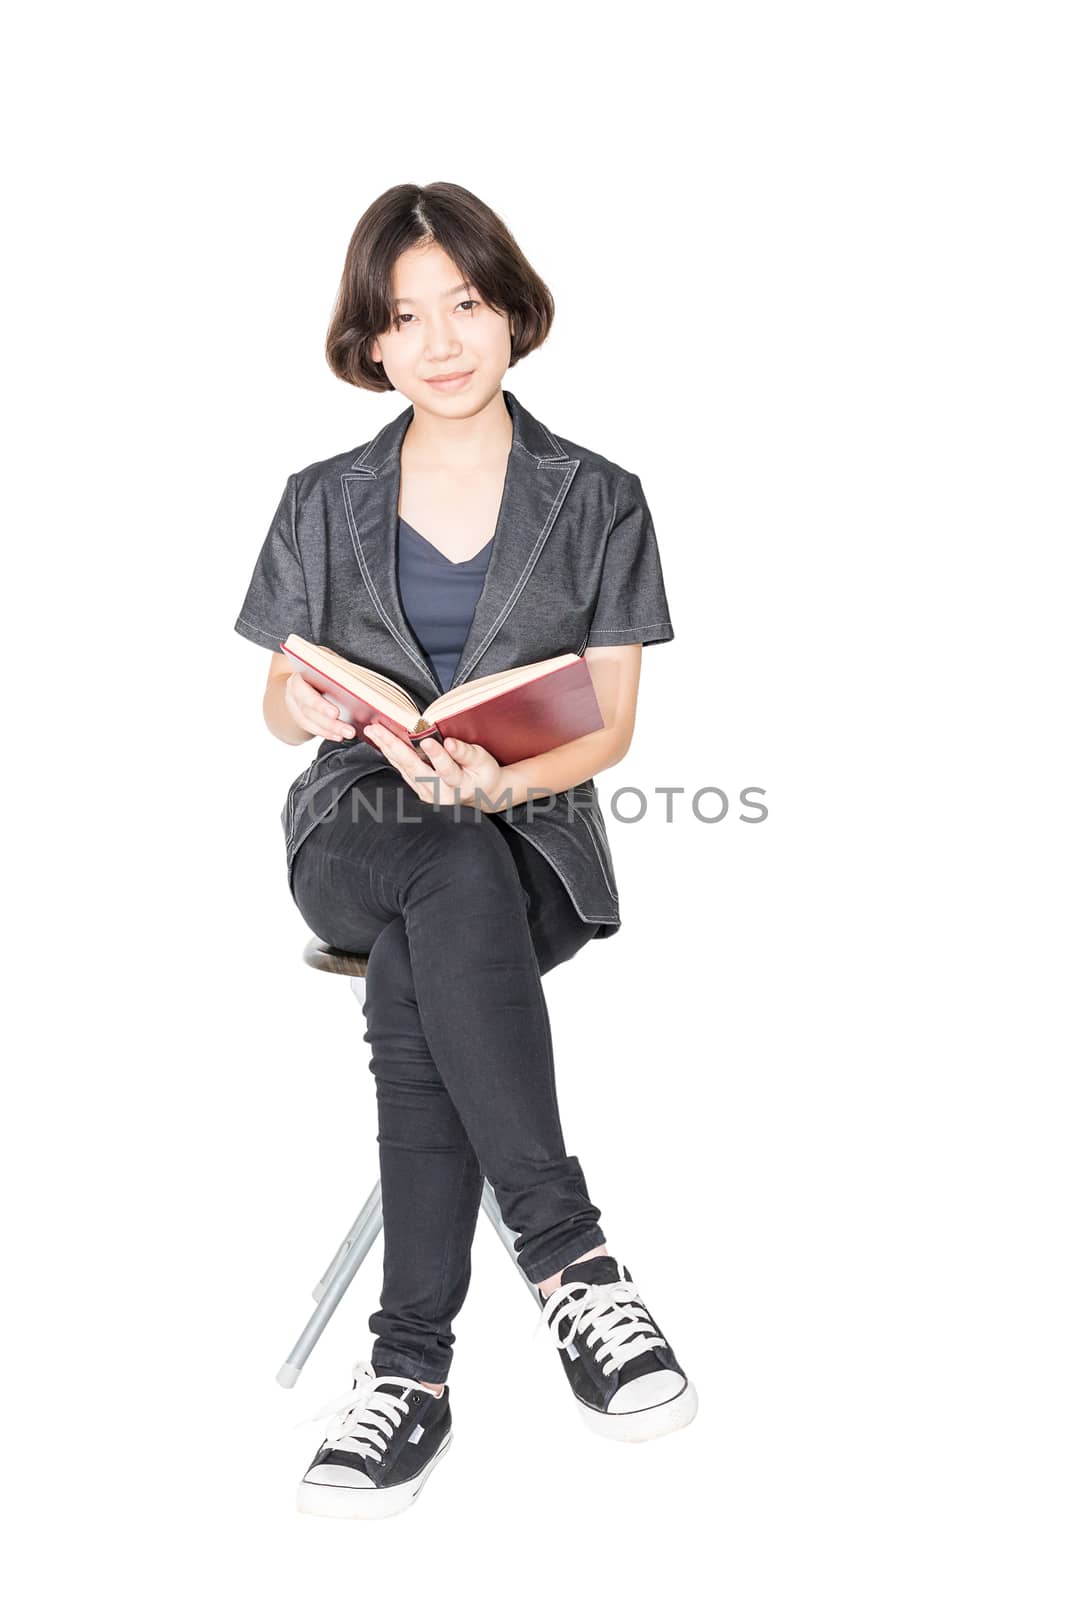  Woman reading a book sitting on chair by stoonn